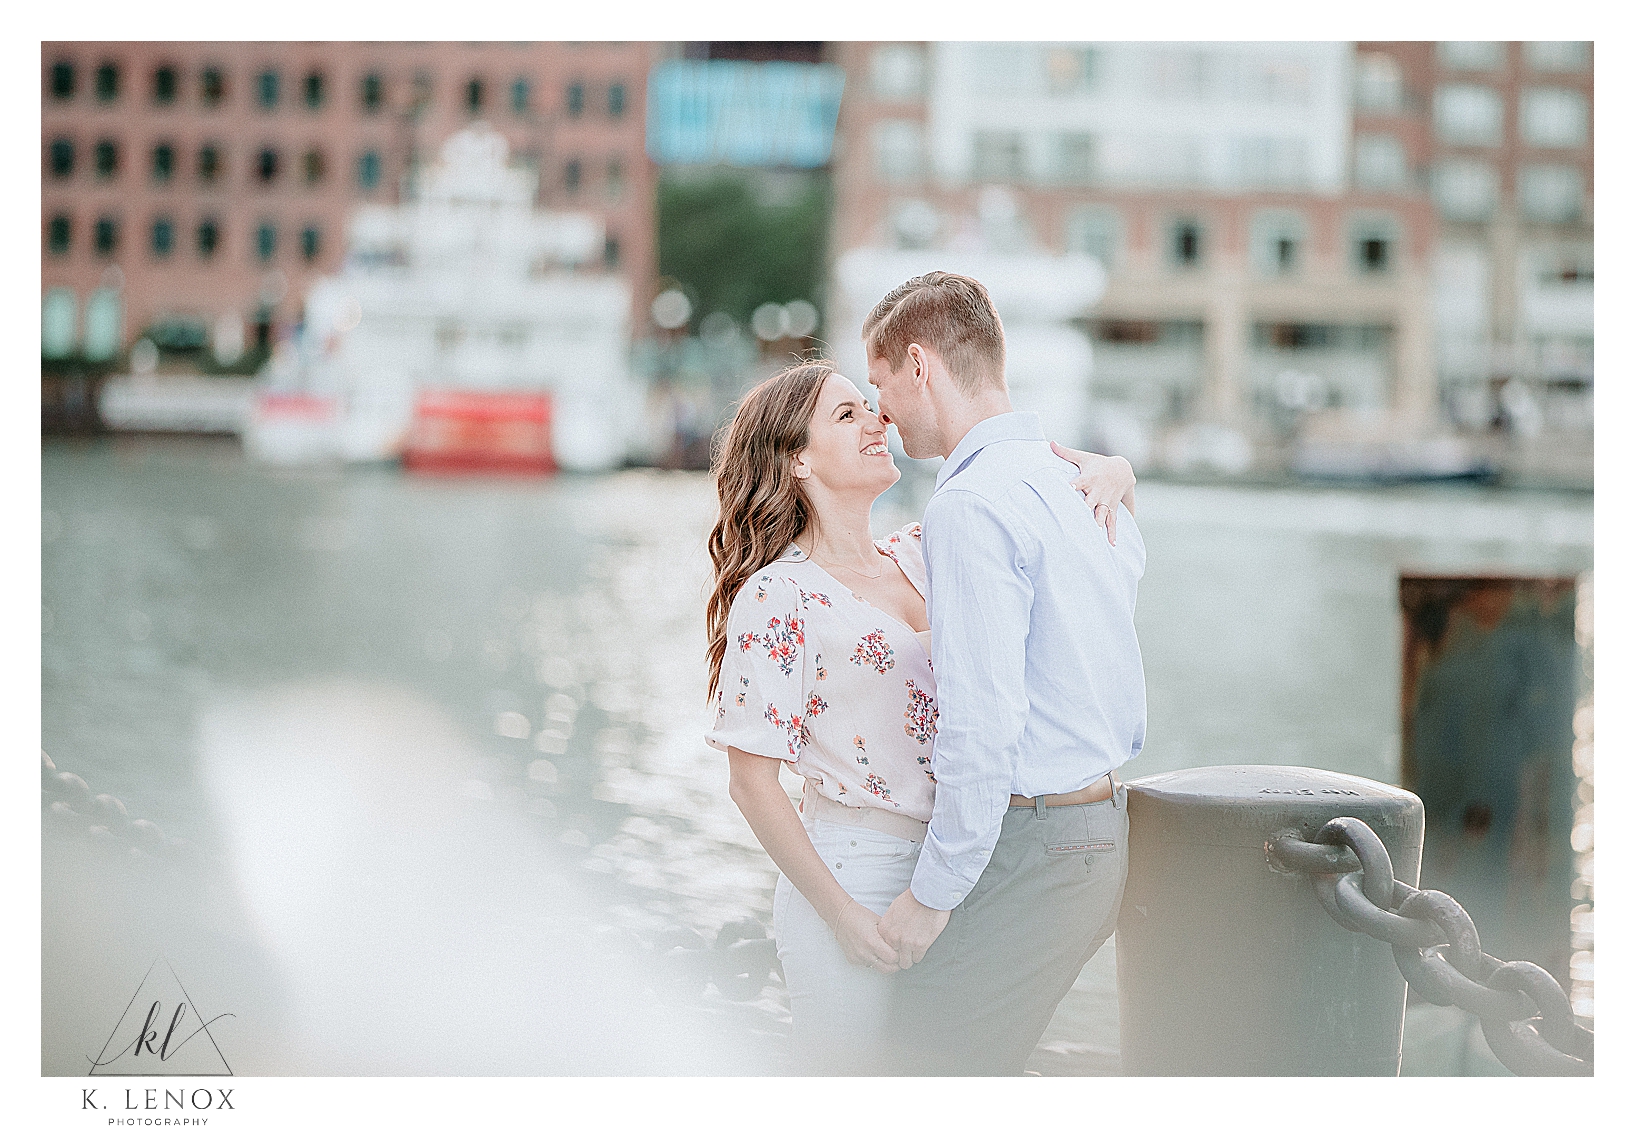 Engaged couple have a candid portrait taken at the Seaport in Boston during their Spring Engagement Session.